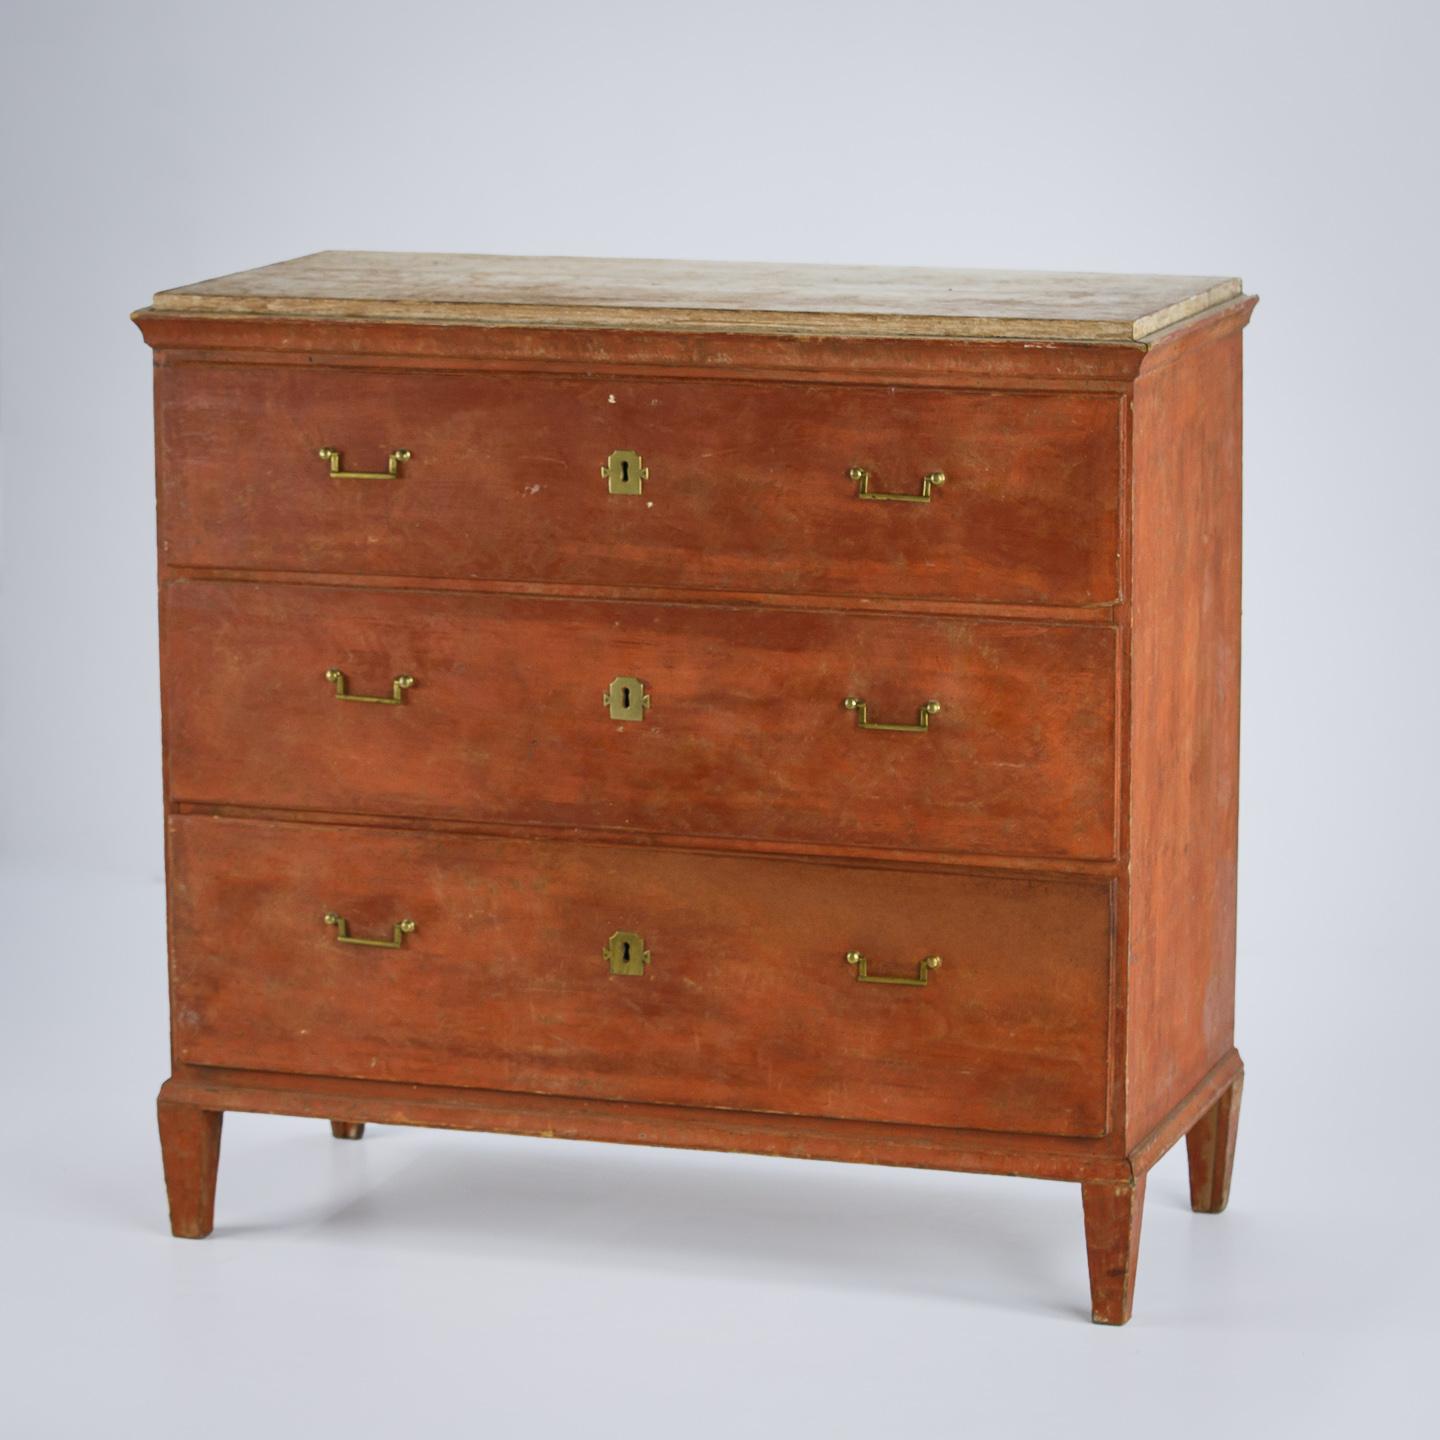 Early 19th Century Swedish chest of drawers, dry scraped back to the original Falun red painted finish. Smart lines, Distressed faux marble painted top. Sweden Circa 1840.